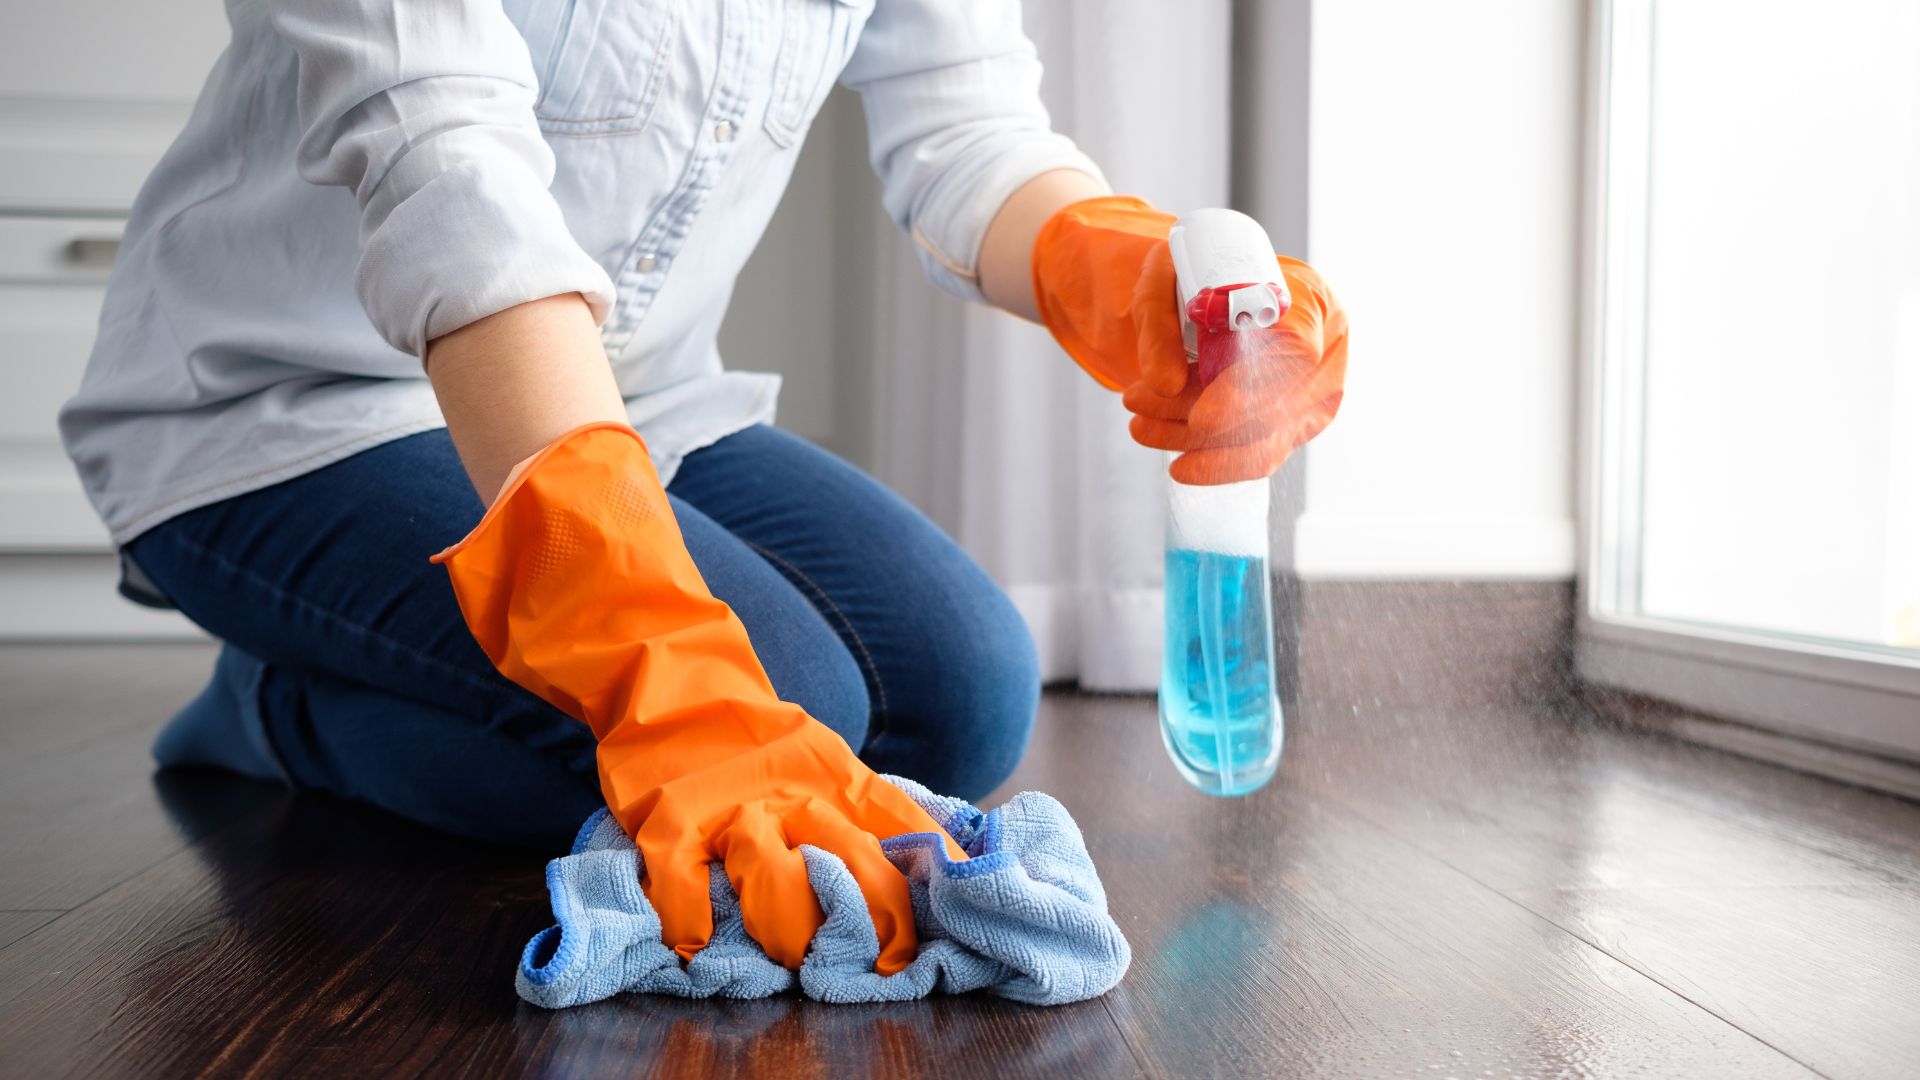 General Cleaning Checklist For All House Areas